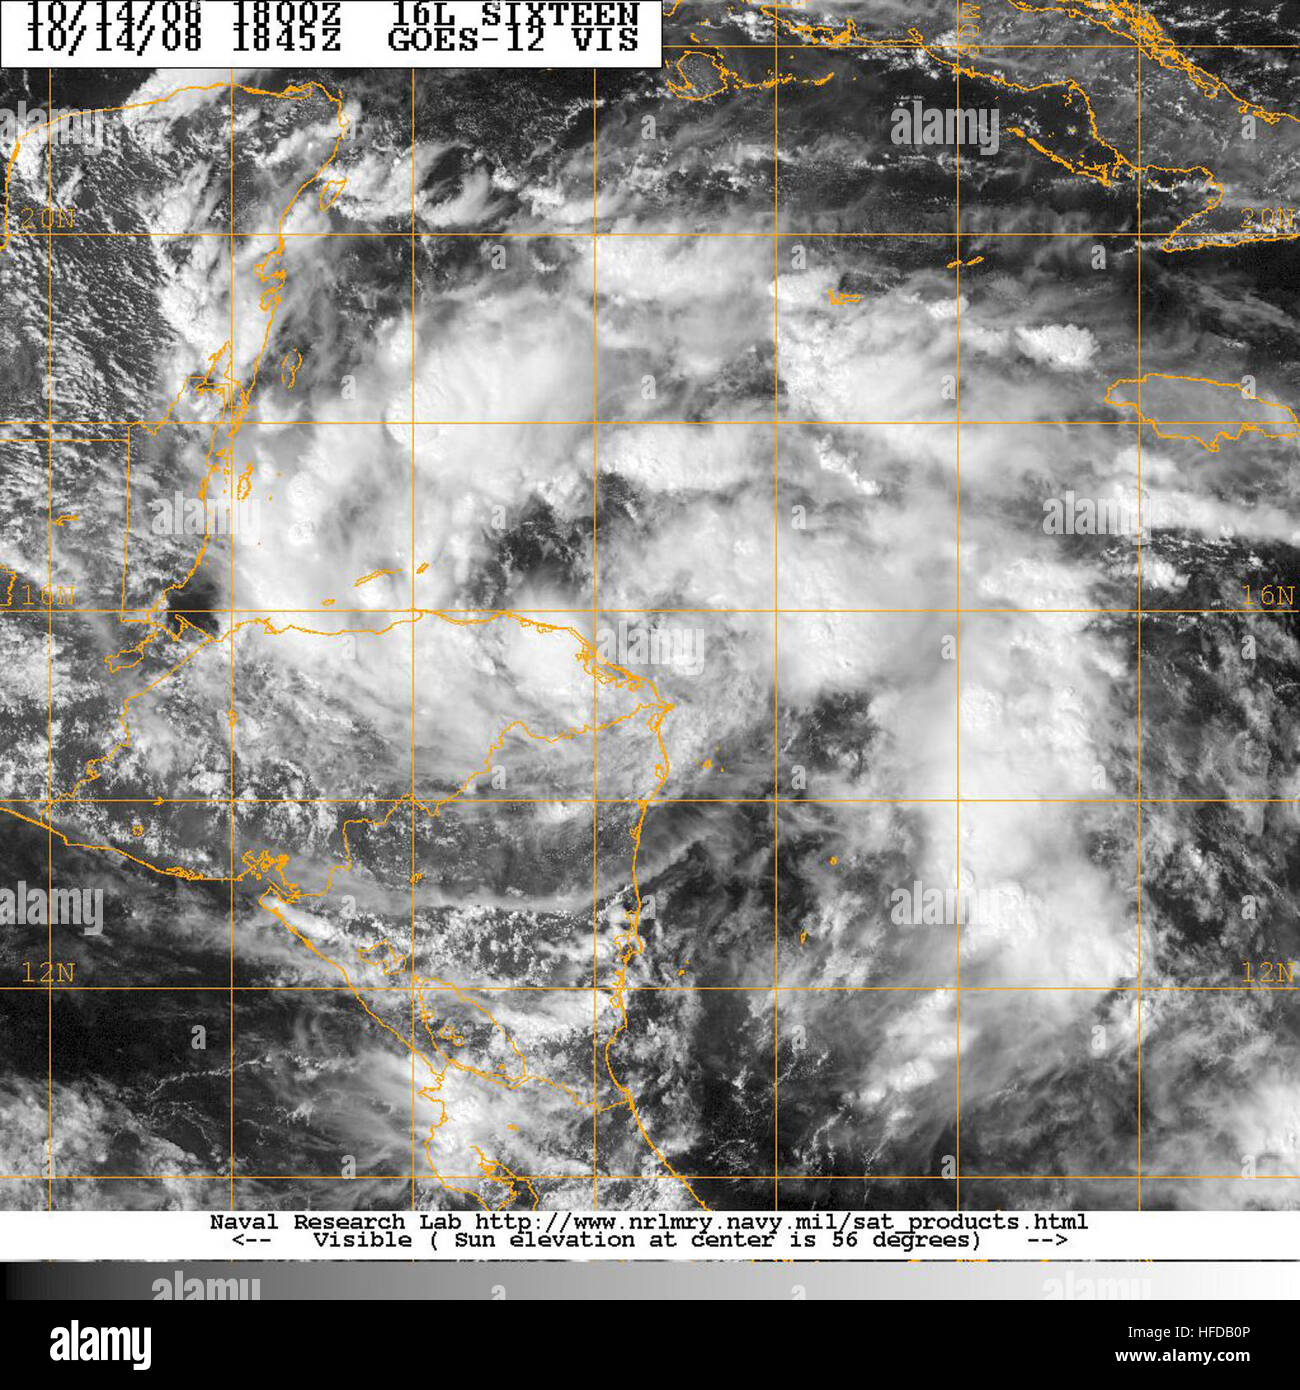 Tropical Depression Sixteen (2008) GOES 12 visible image Stock Photo